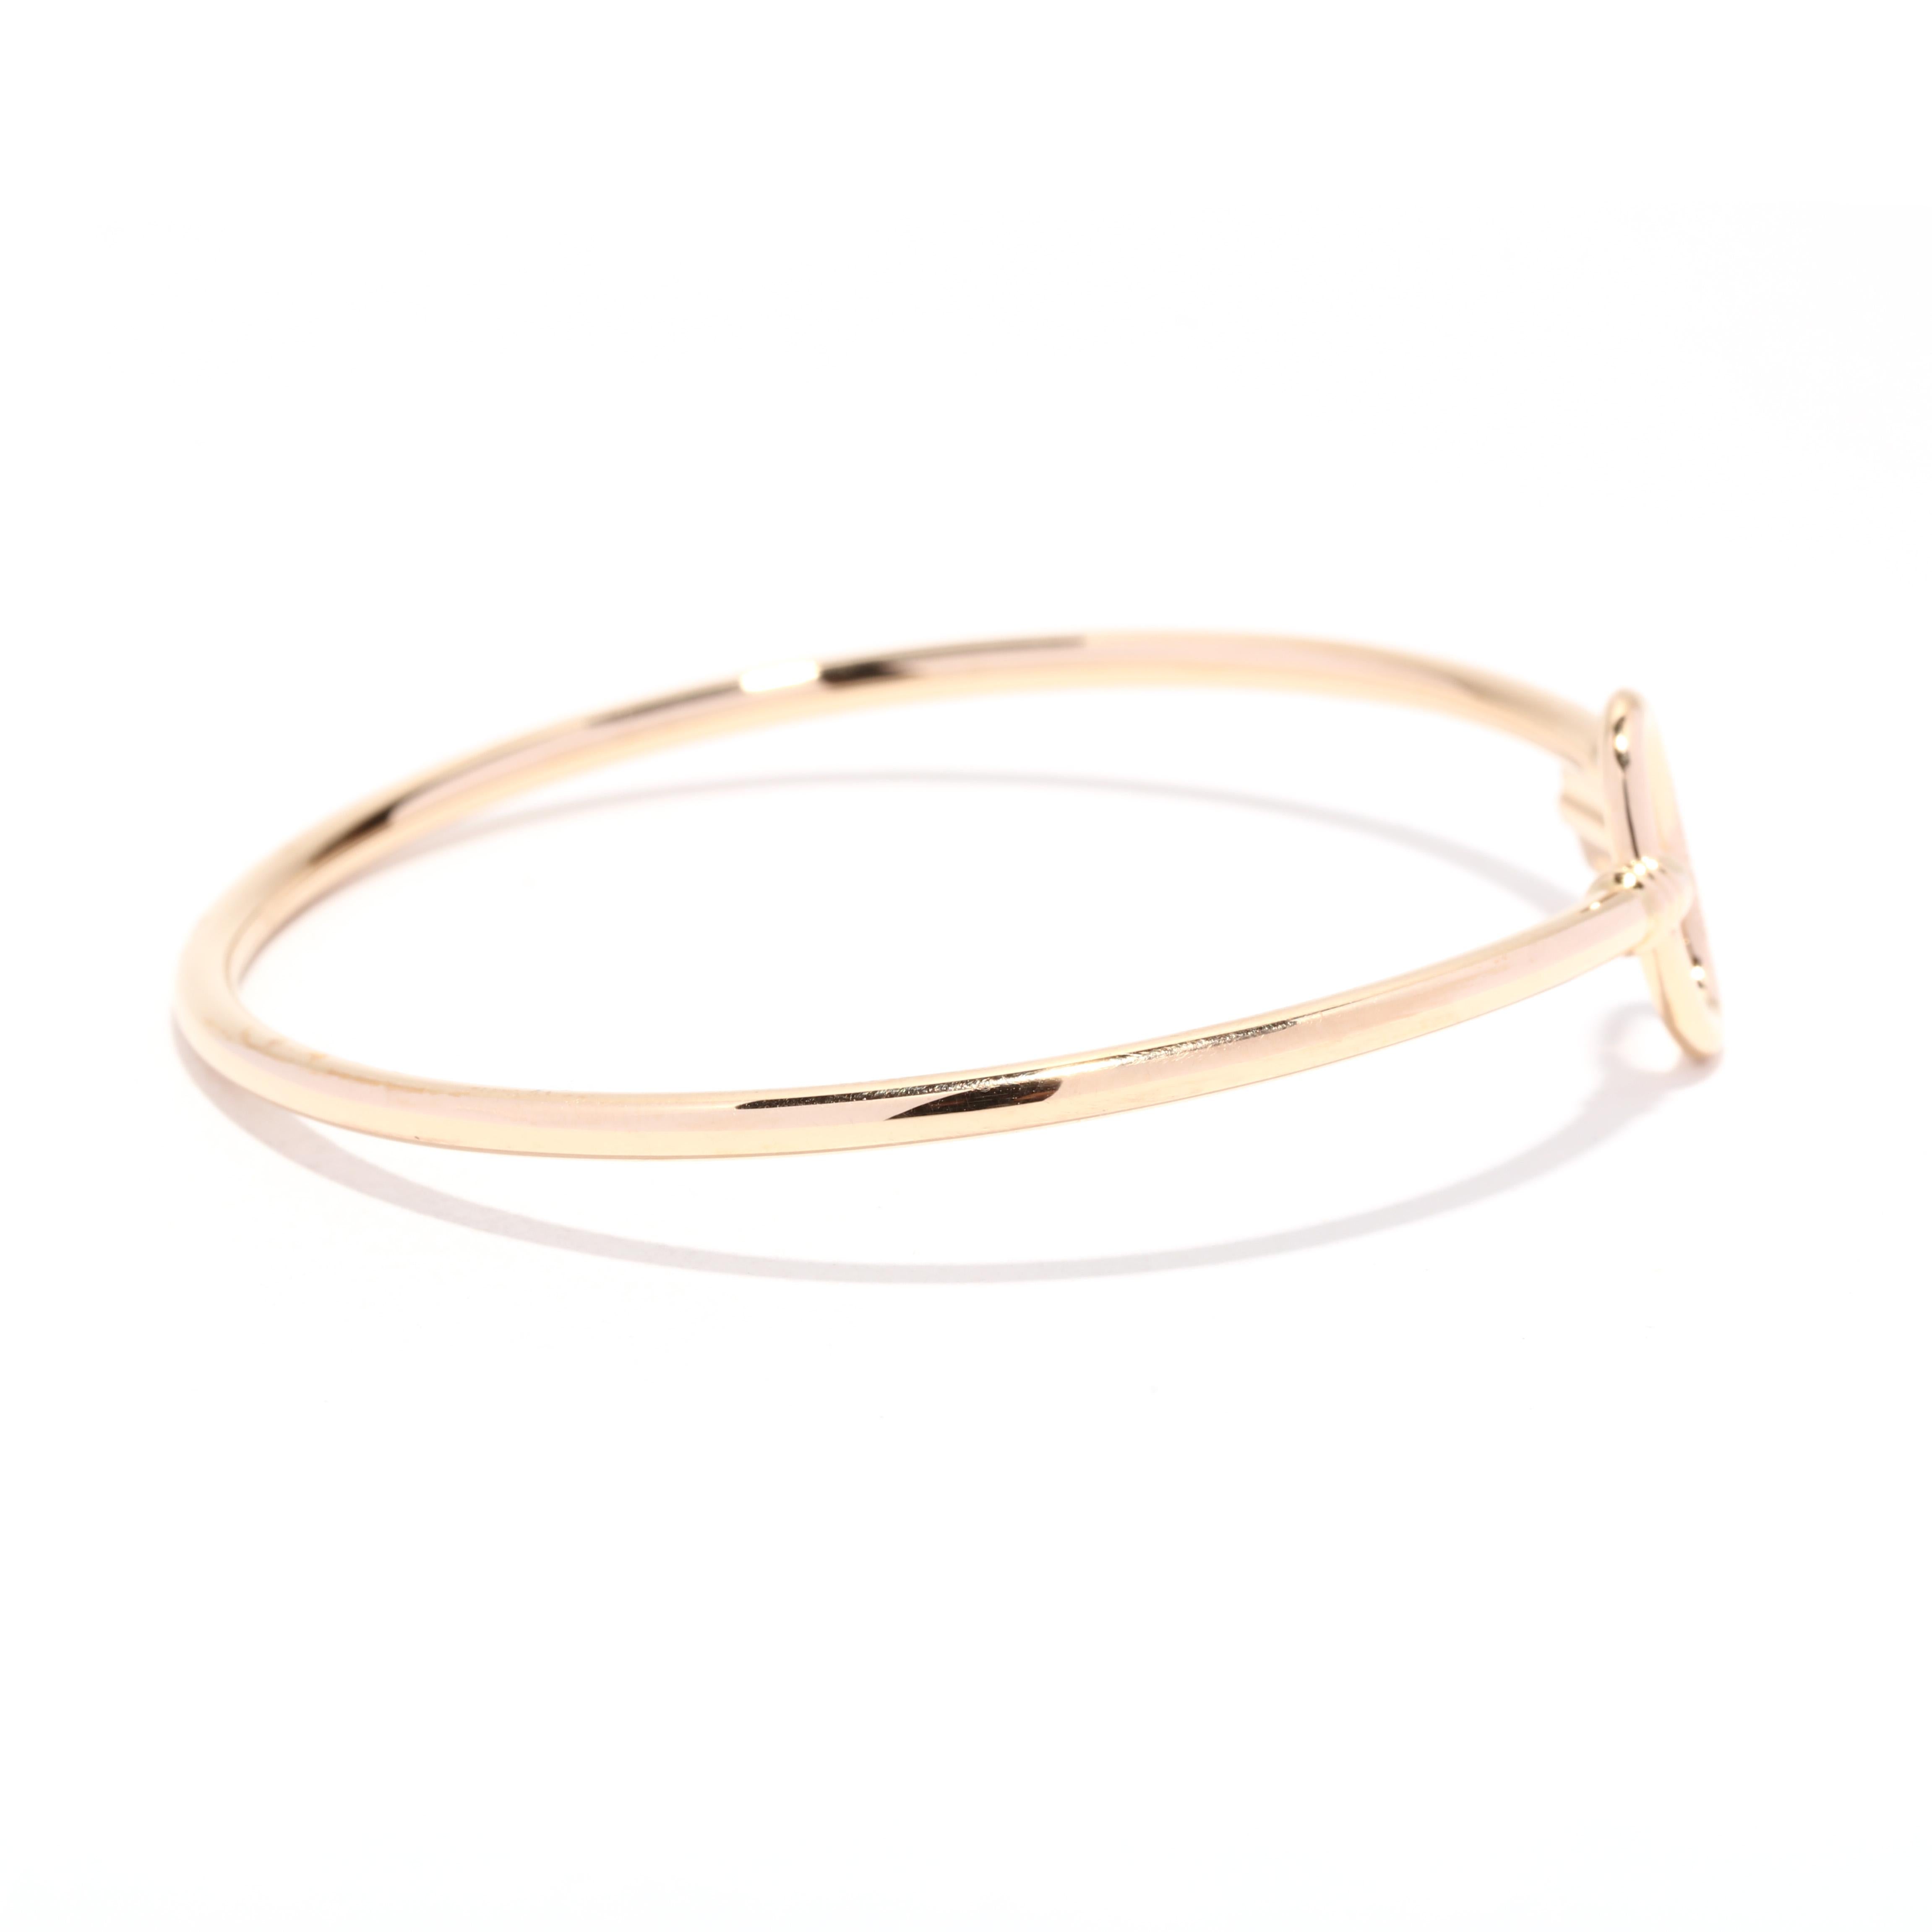 A Tiffany & Company 18 karat gold key wire cuff bracelet. This stackable cuff features a thin flexible design with an open oval at one end and a key motif at the other.

Length: 7 in. 

Width: 1/2 in.

Weight: 4.6 dwts. / 7.2 grams

Stamps: T&CO